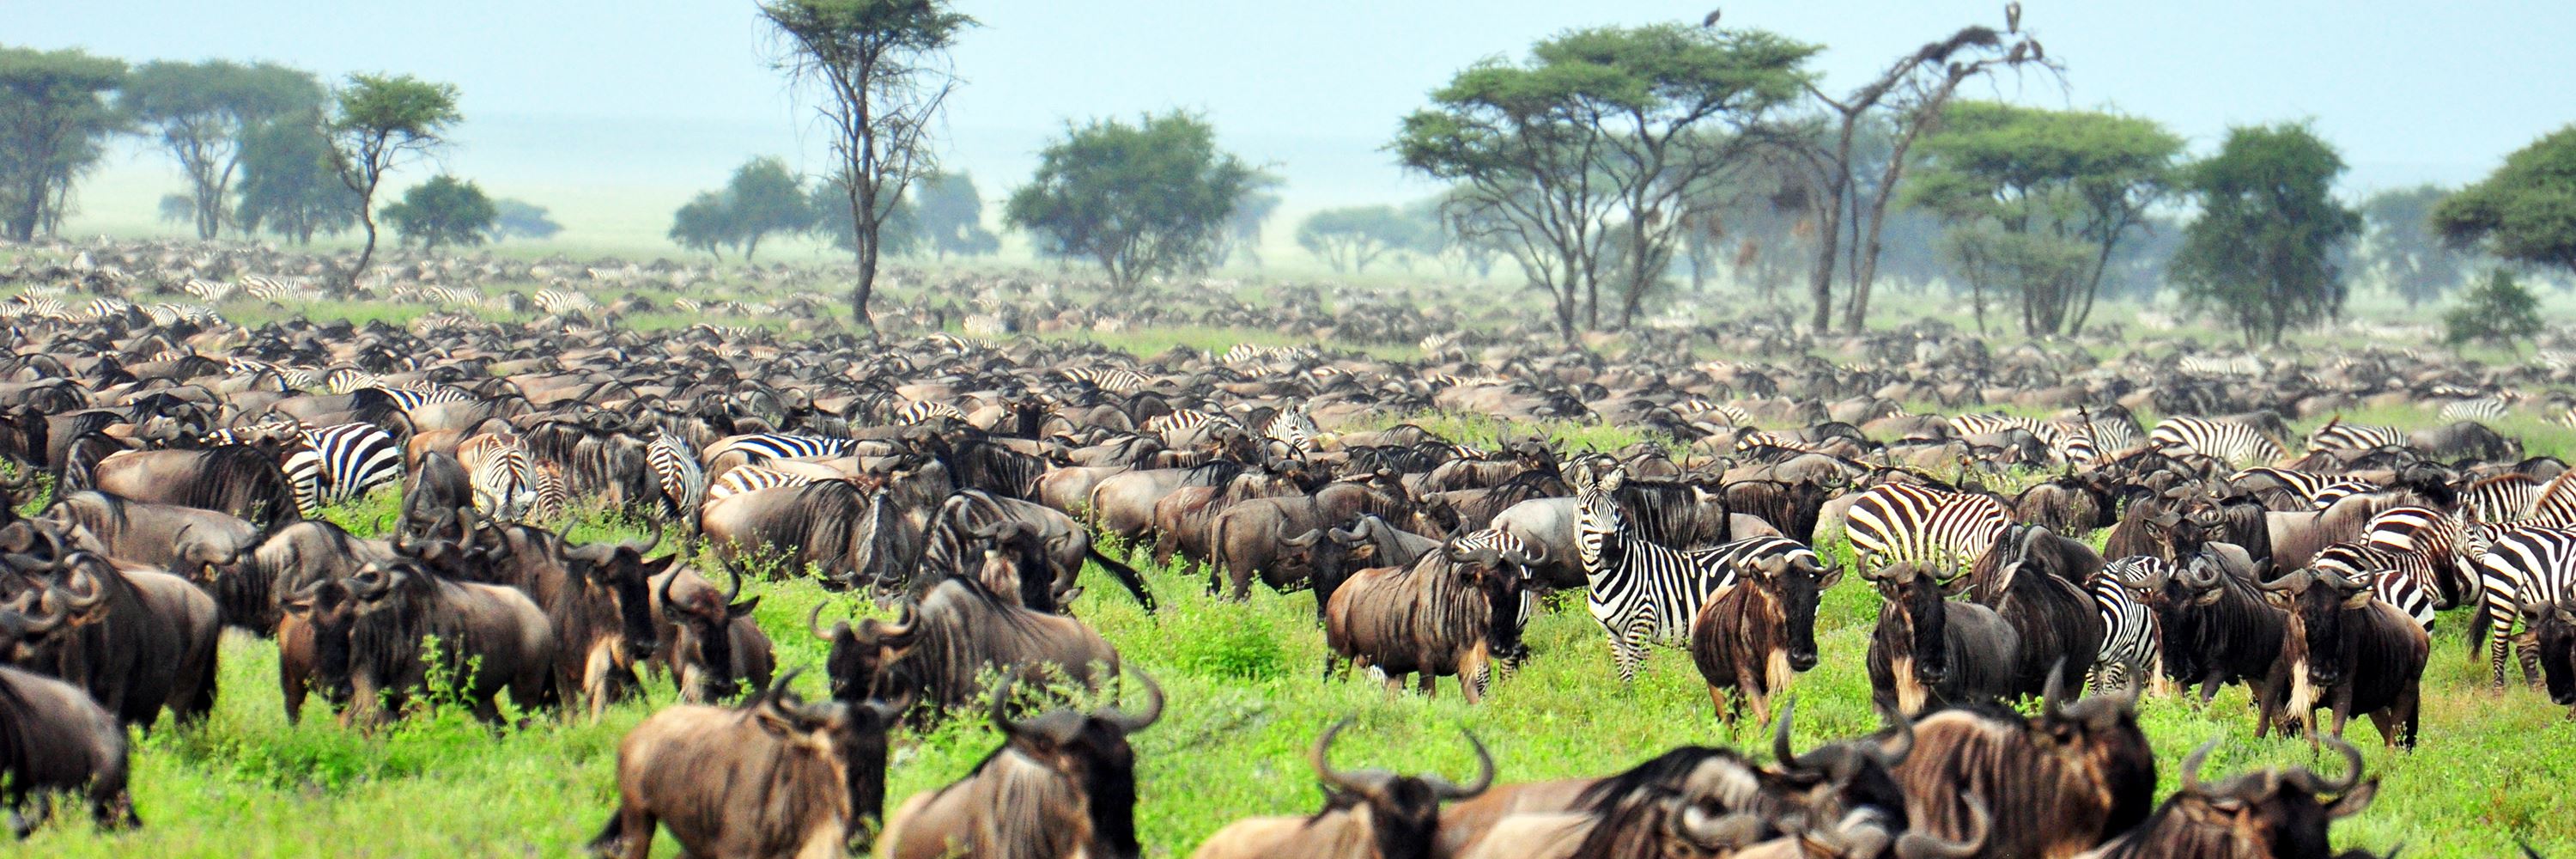 See the Great Migration, Tanzania | Audley Travel